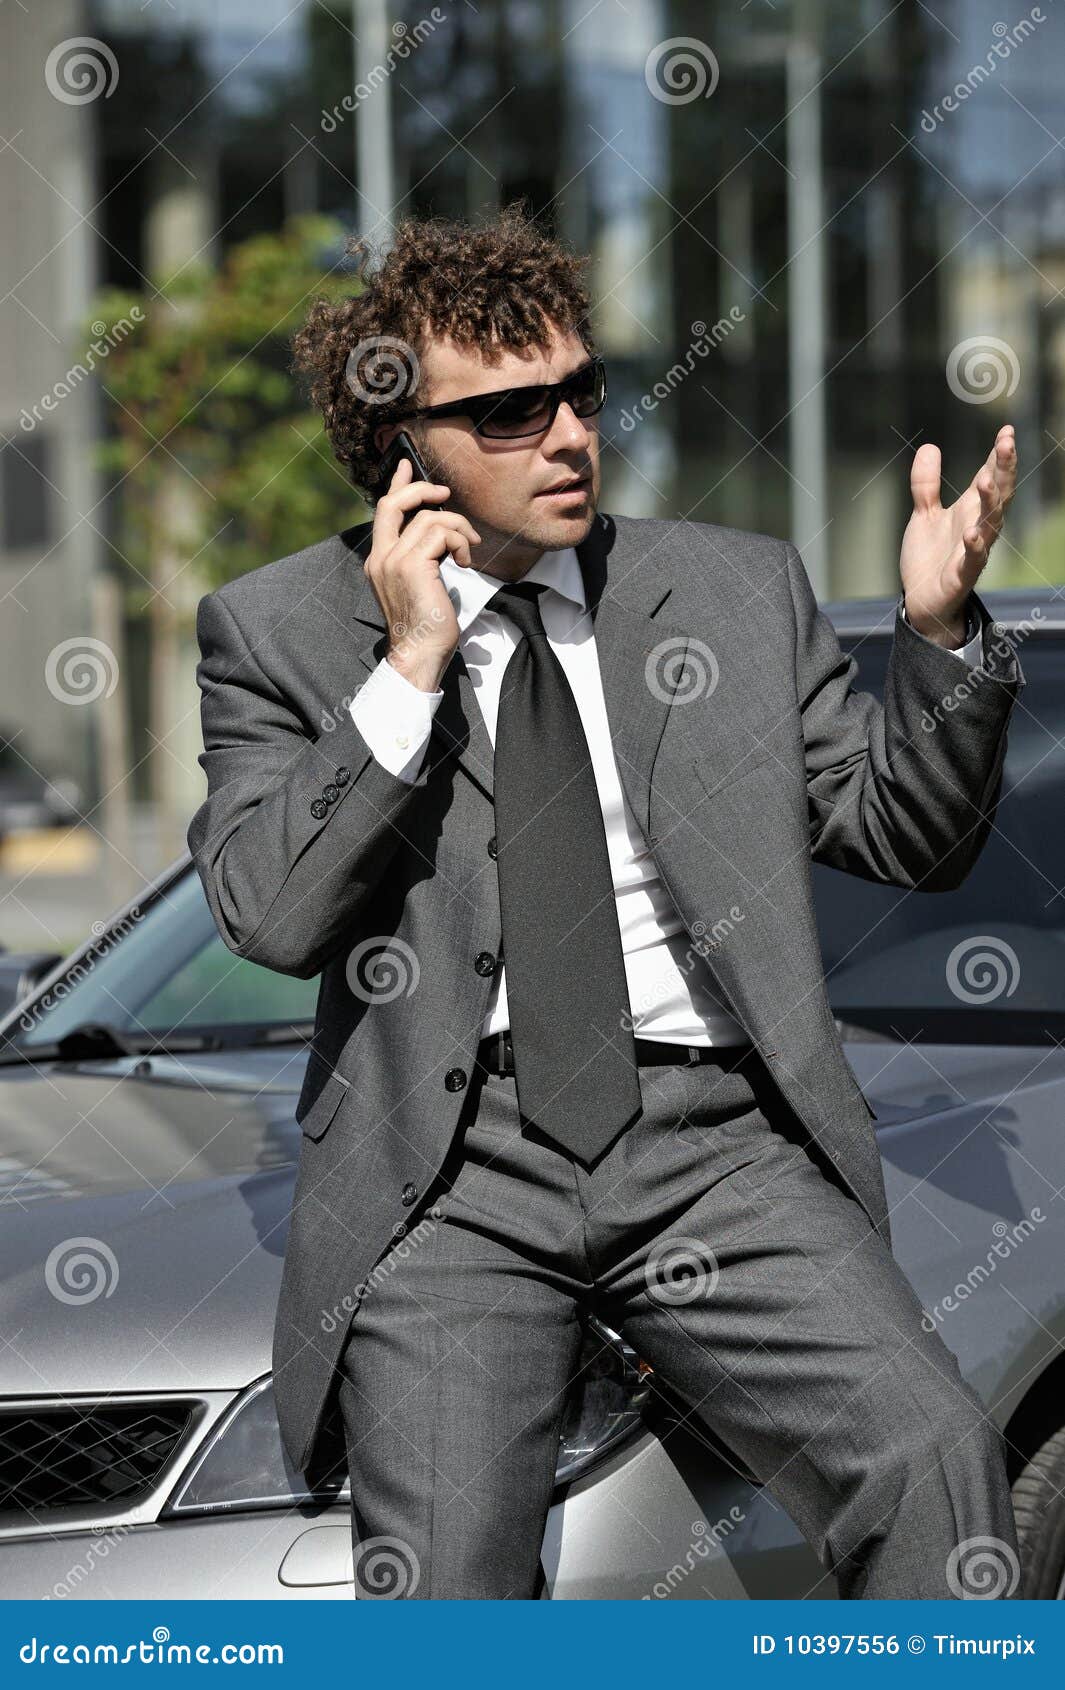 Business executive stock photo. Image of cellphone, wealthy - 10397556